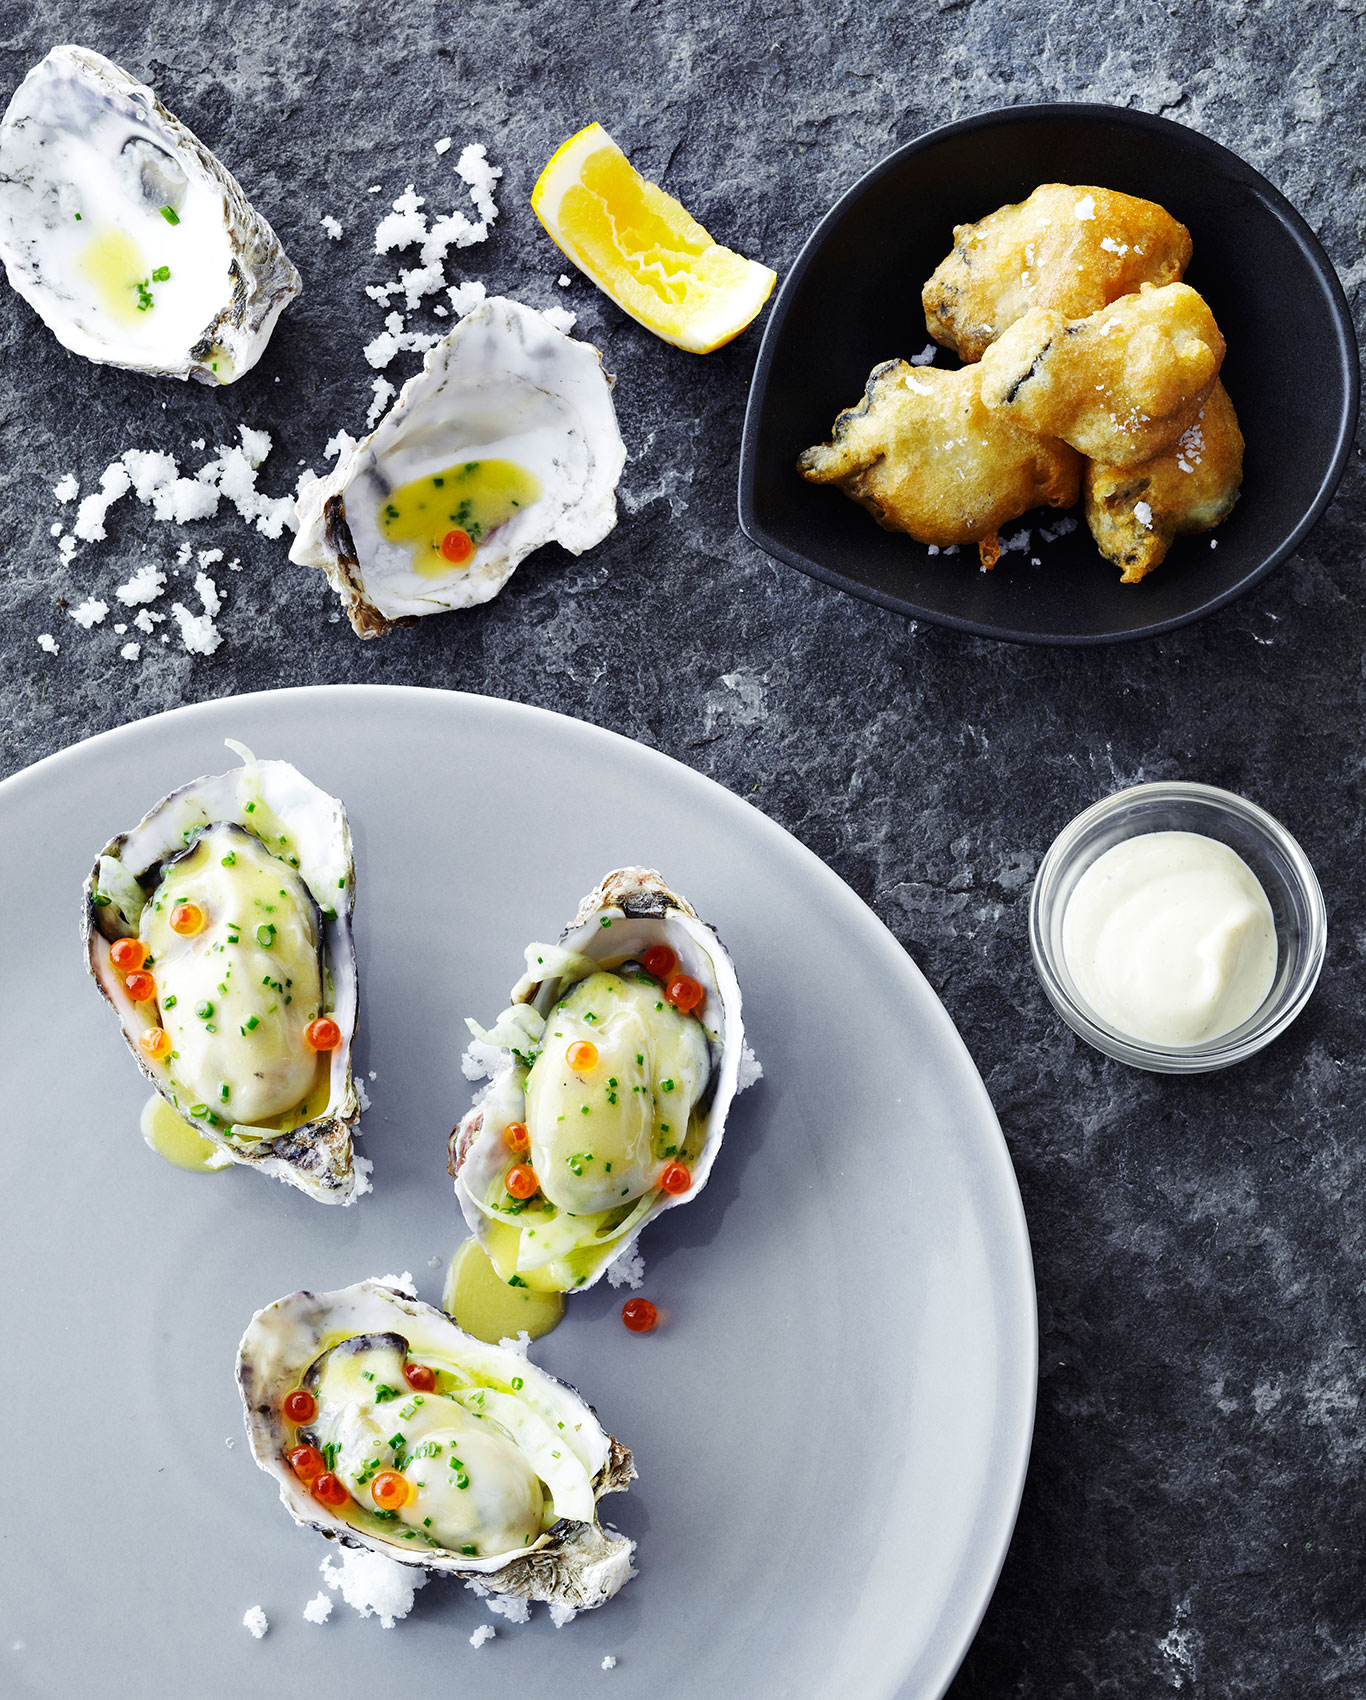 Southon Cooking • The Foodstore Cooked & Raw Oysters with Roe, Lemon & Salt • Hospitality & Editorial Food Photography